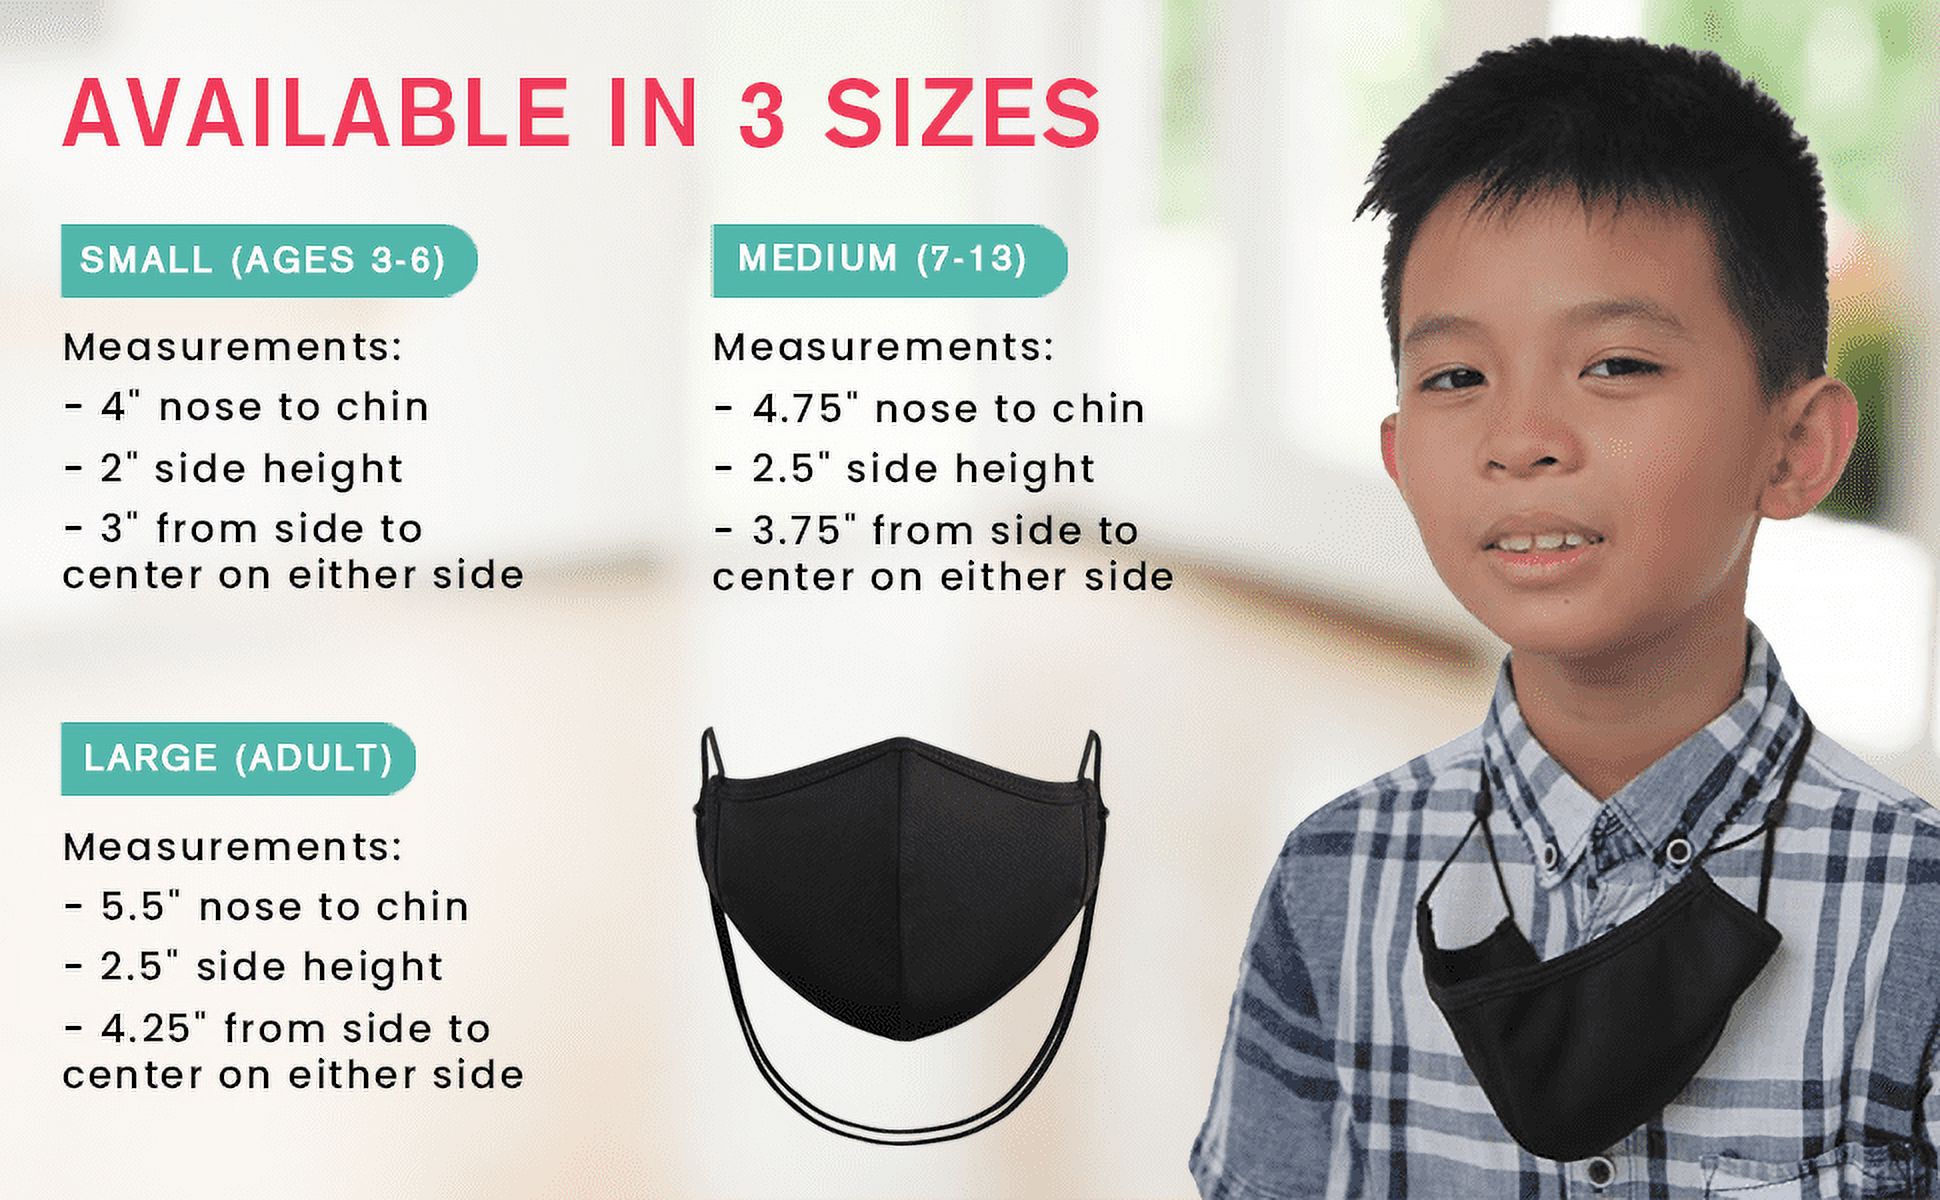 Atzi Hats Face Mask Adjustable Elastic Necklace Ear Loops Black 3 Layer Cotton Masks Reusable Washable Unisex for Kids Men Women Youth Teens Children Toddlers (Small Kids Ages 3-6) - image 5 of 6